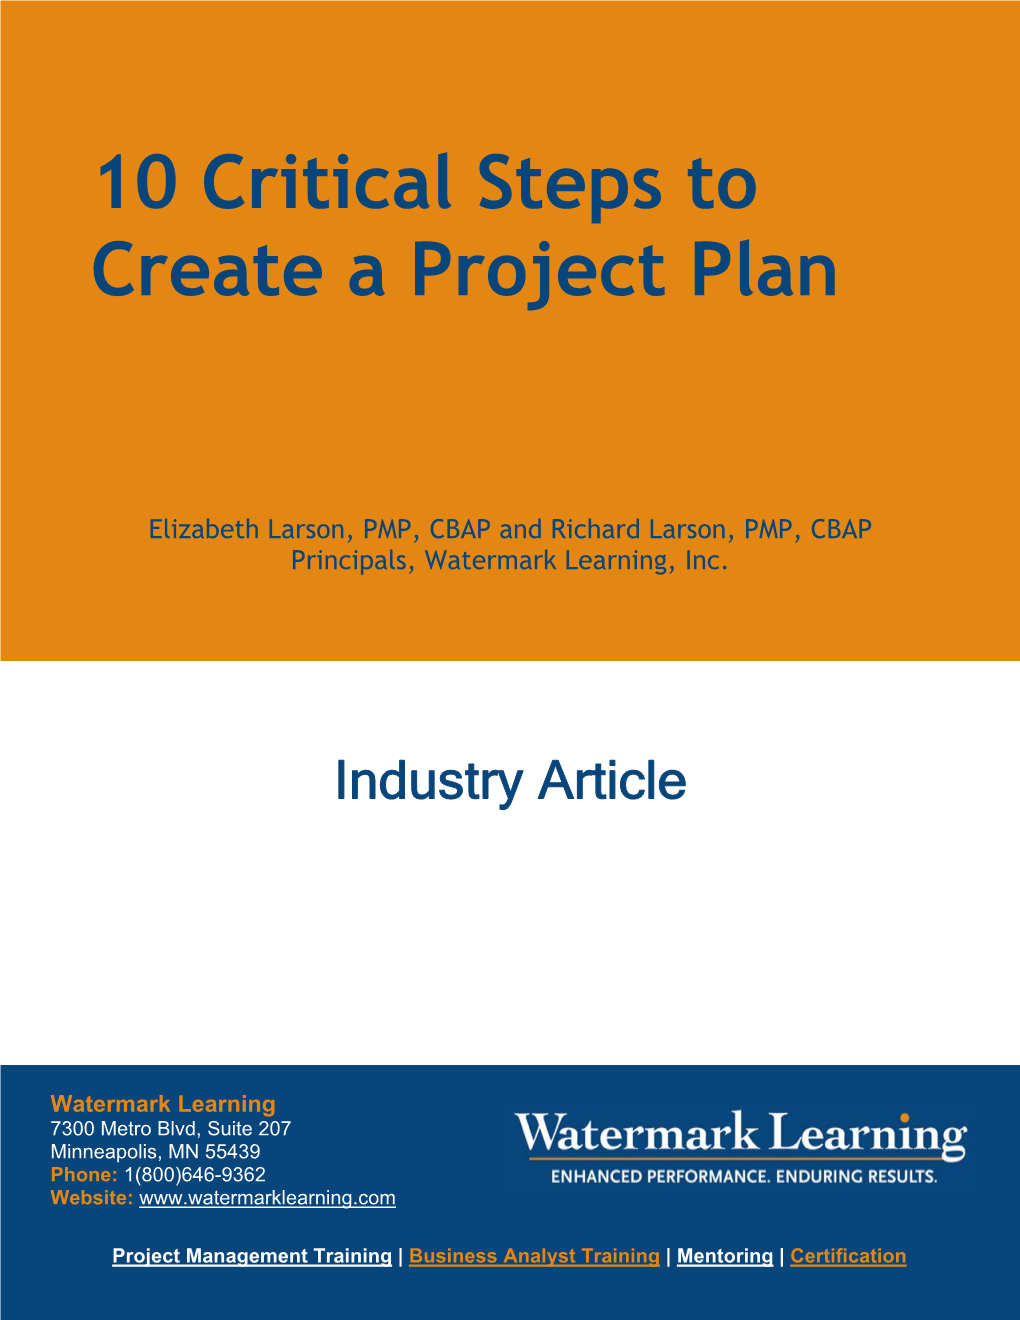 10 Critical Steps to Create a Project Plan